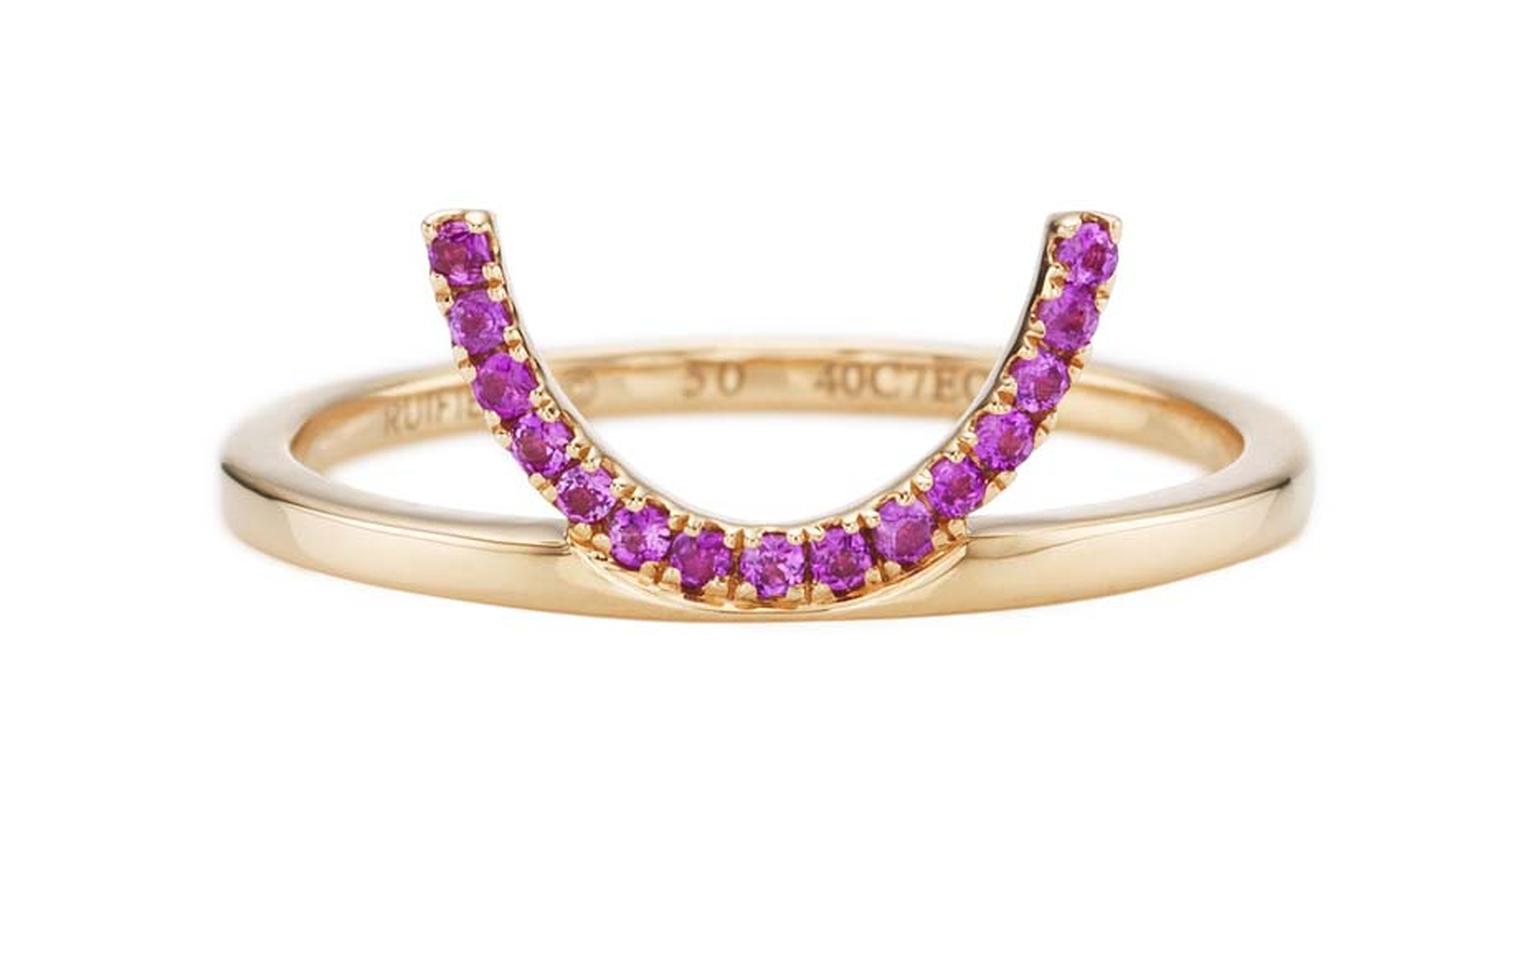 Ruifier rose gold Visage Crescent ring with pink sapphires.